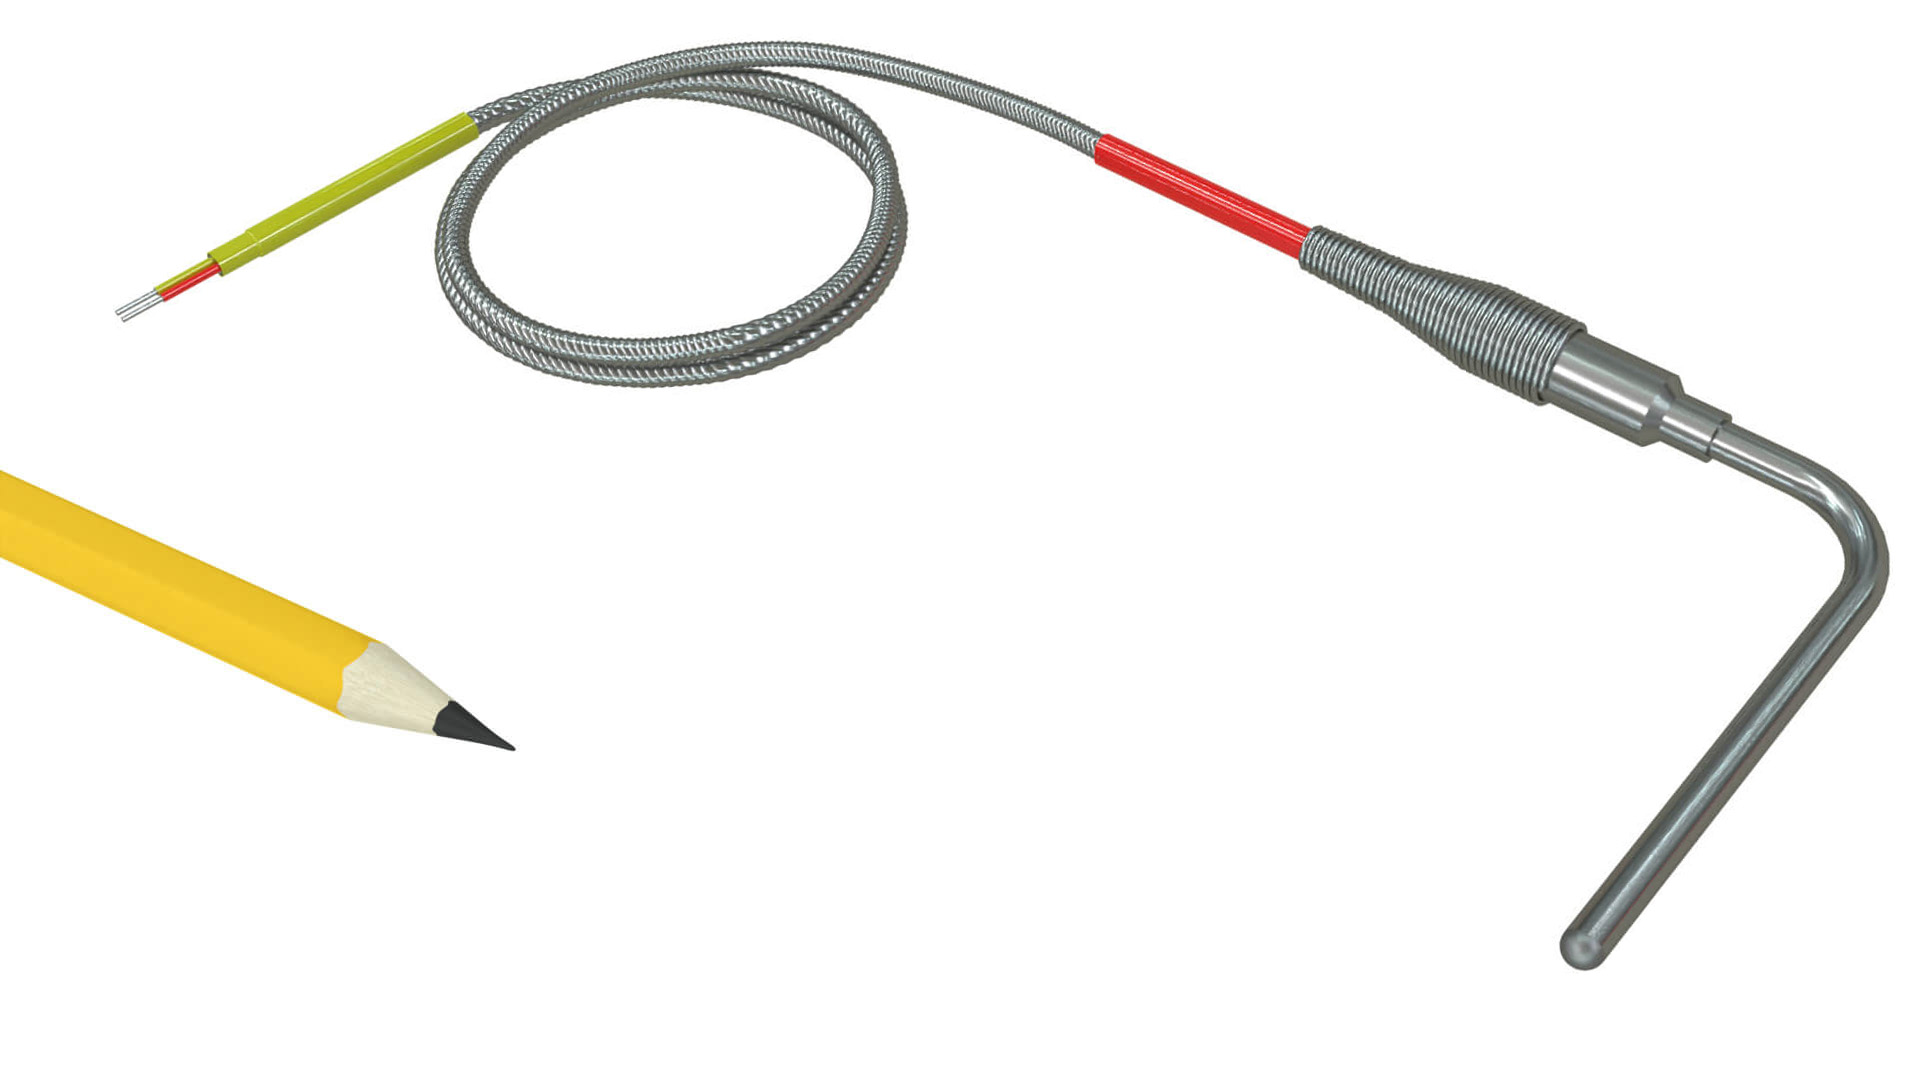 TTJ9 Transition Joint Thermocouple Probe 90 degree Sheath Enclosed Junction